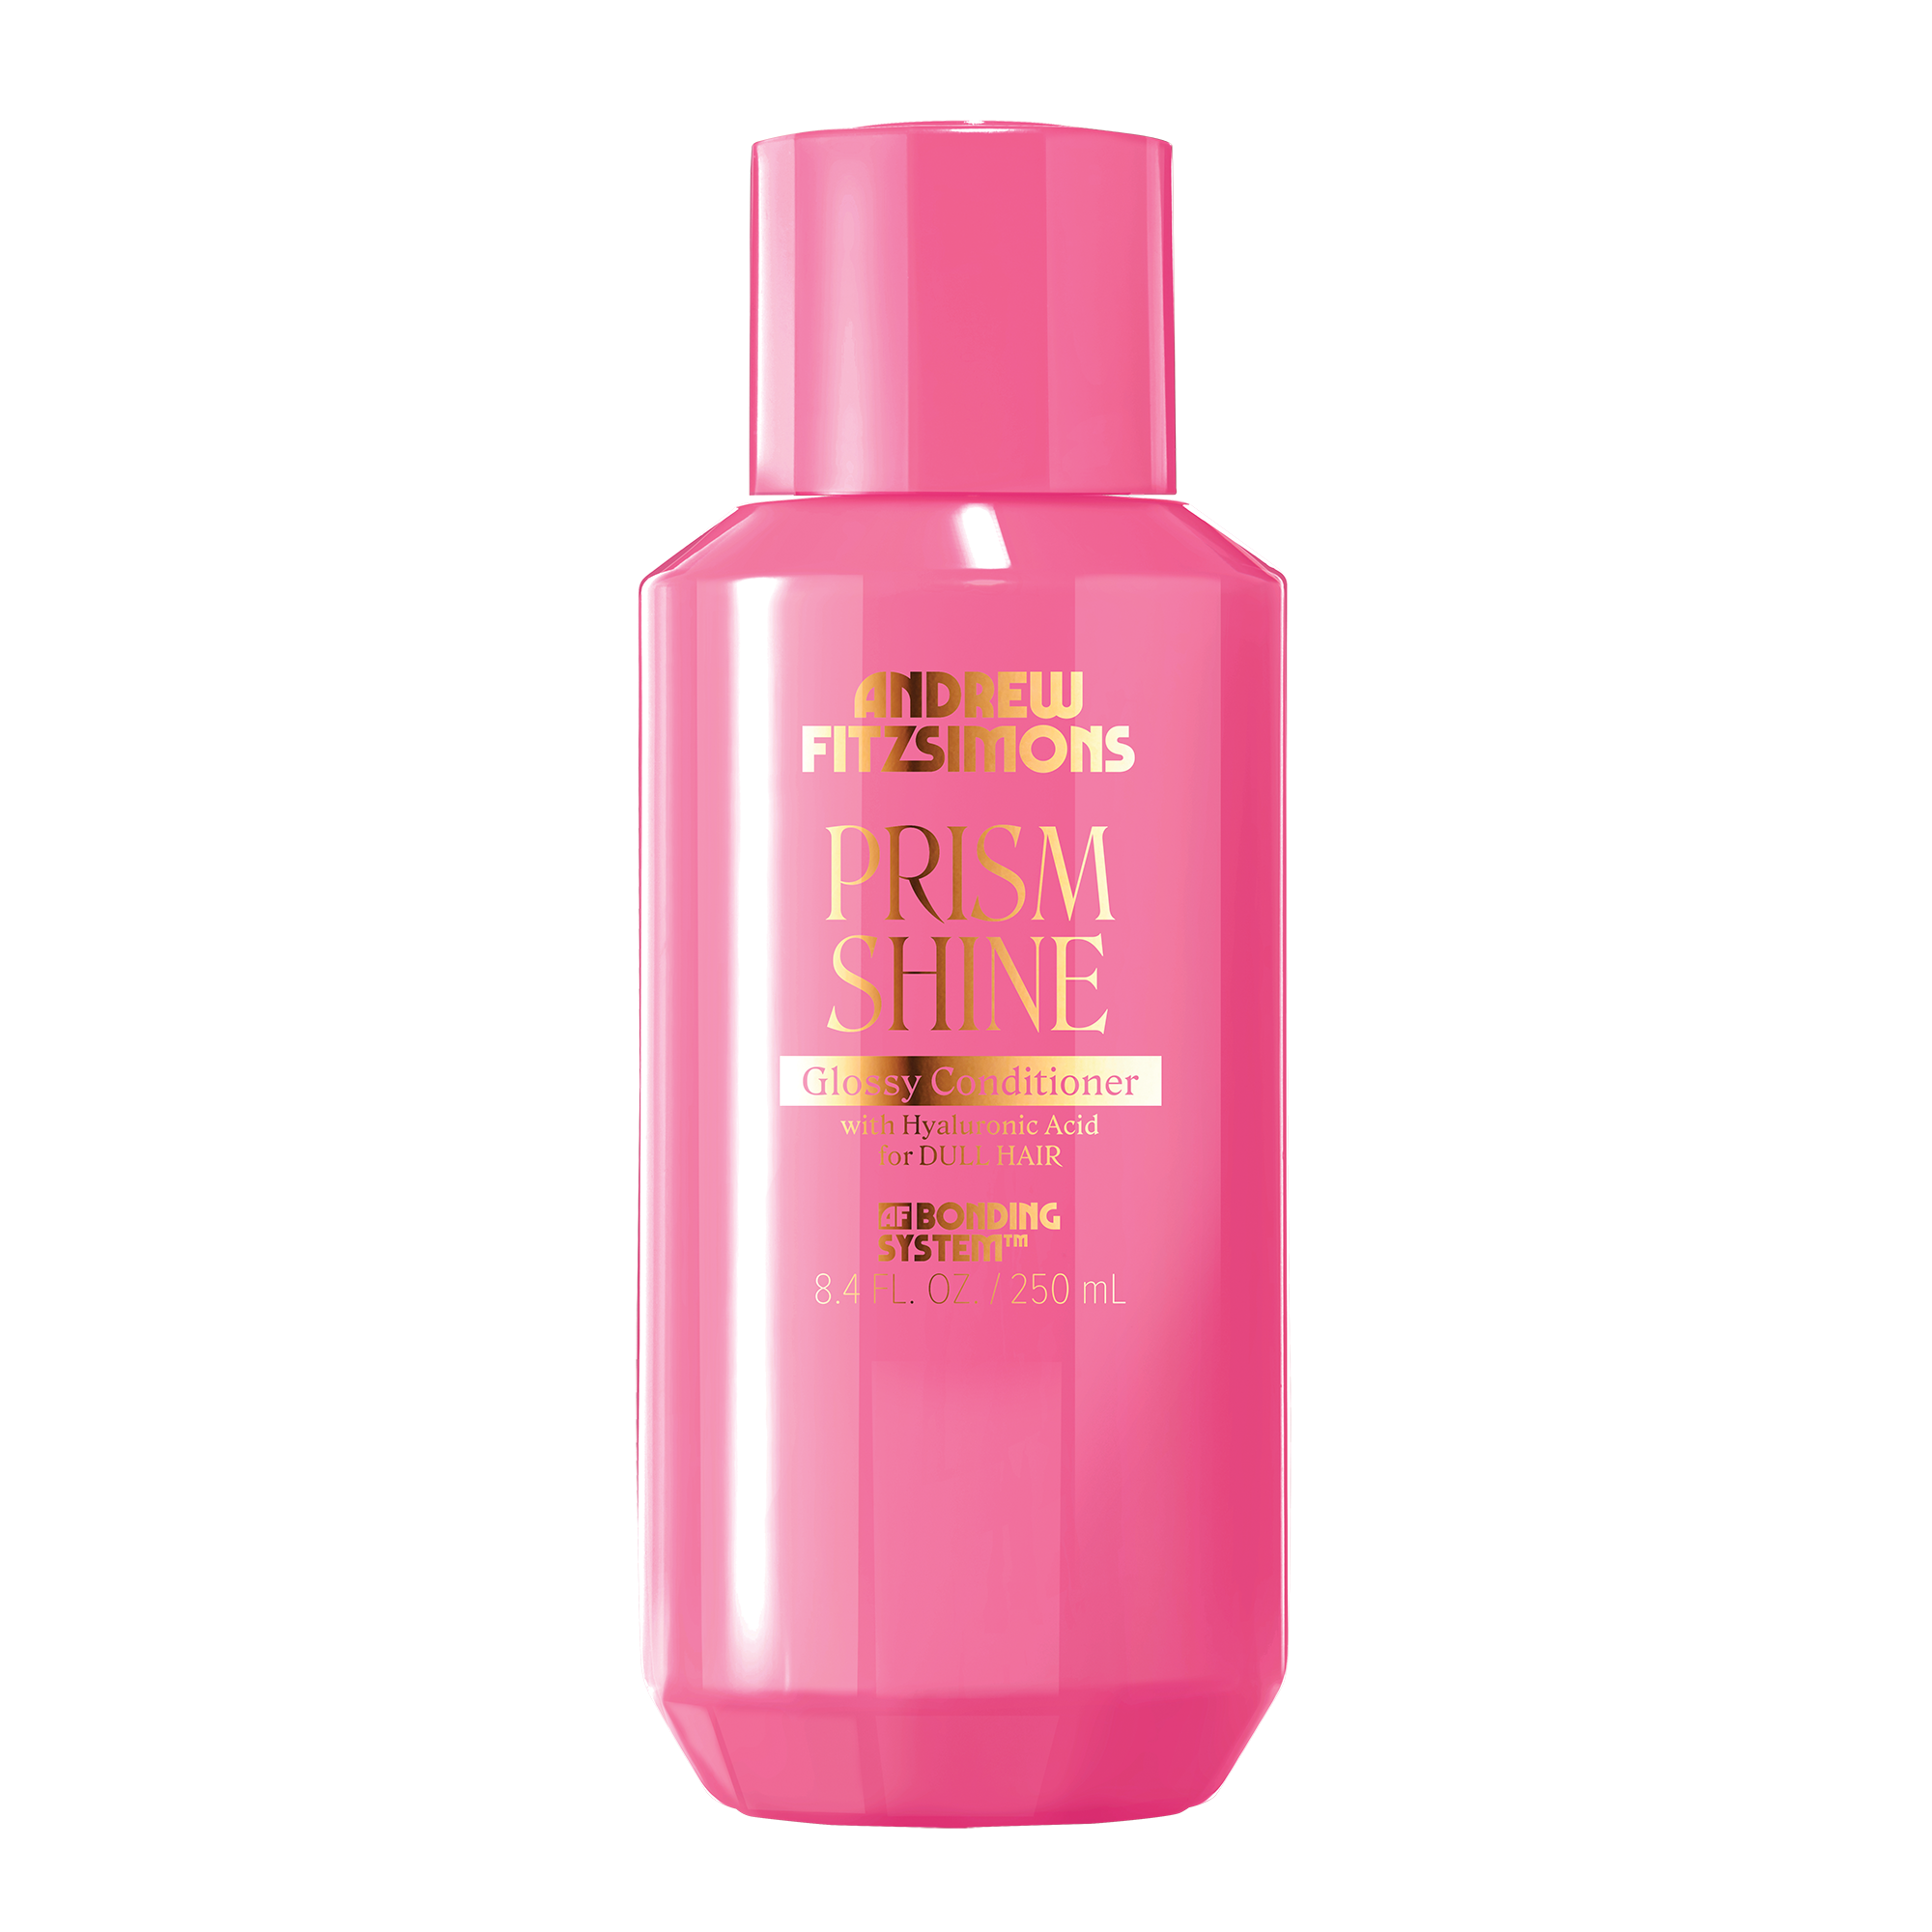 PRISM SHINE Glossy Conditioner with Avocado and Shea Butter